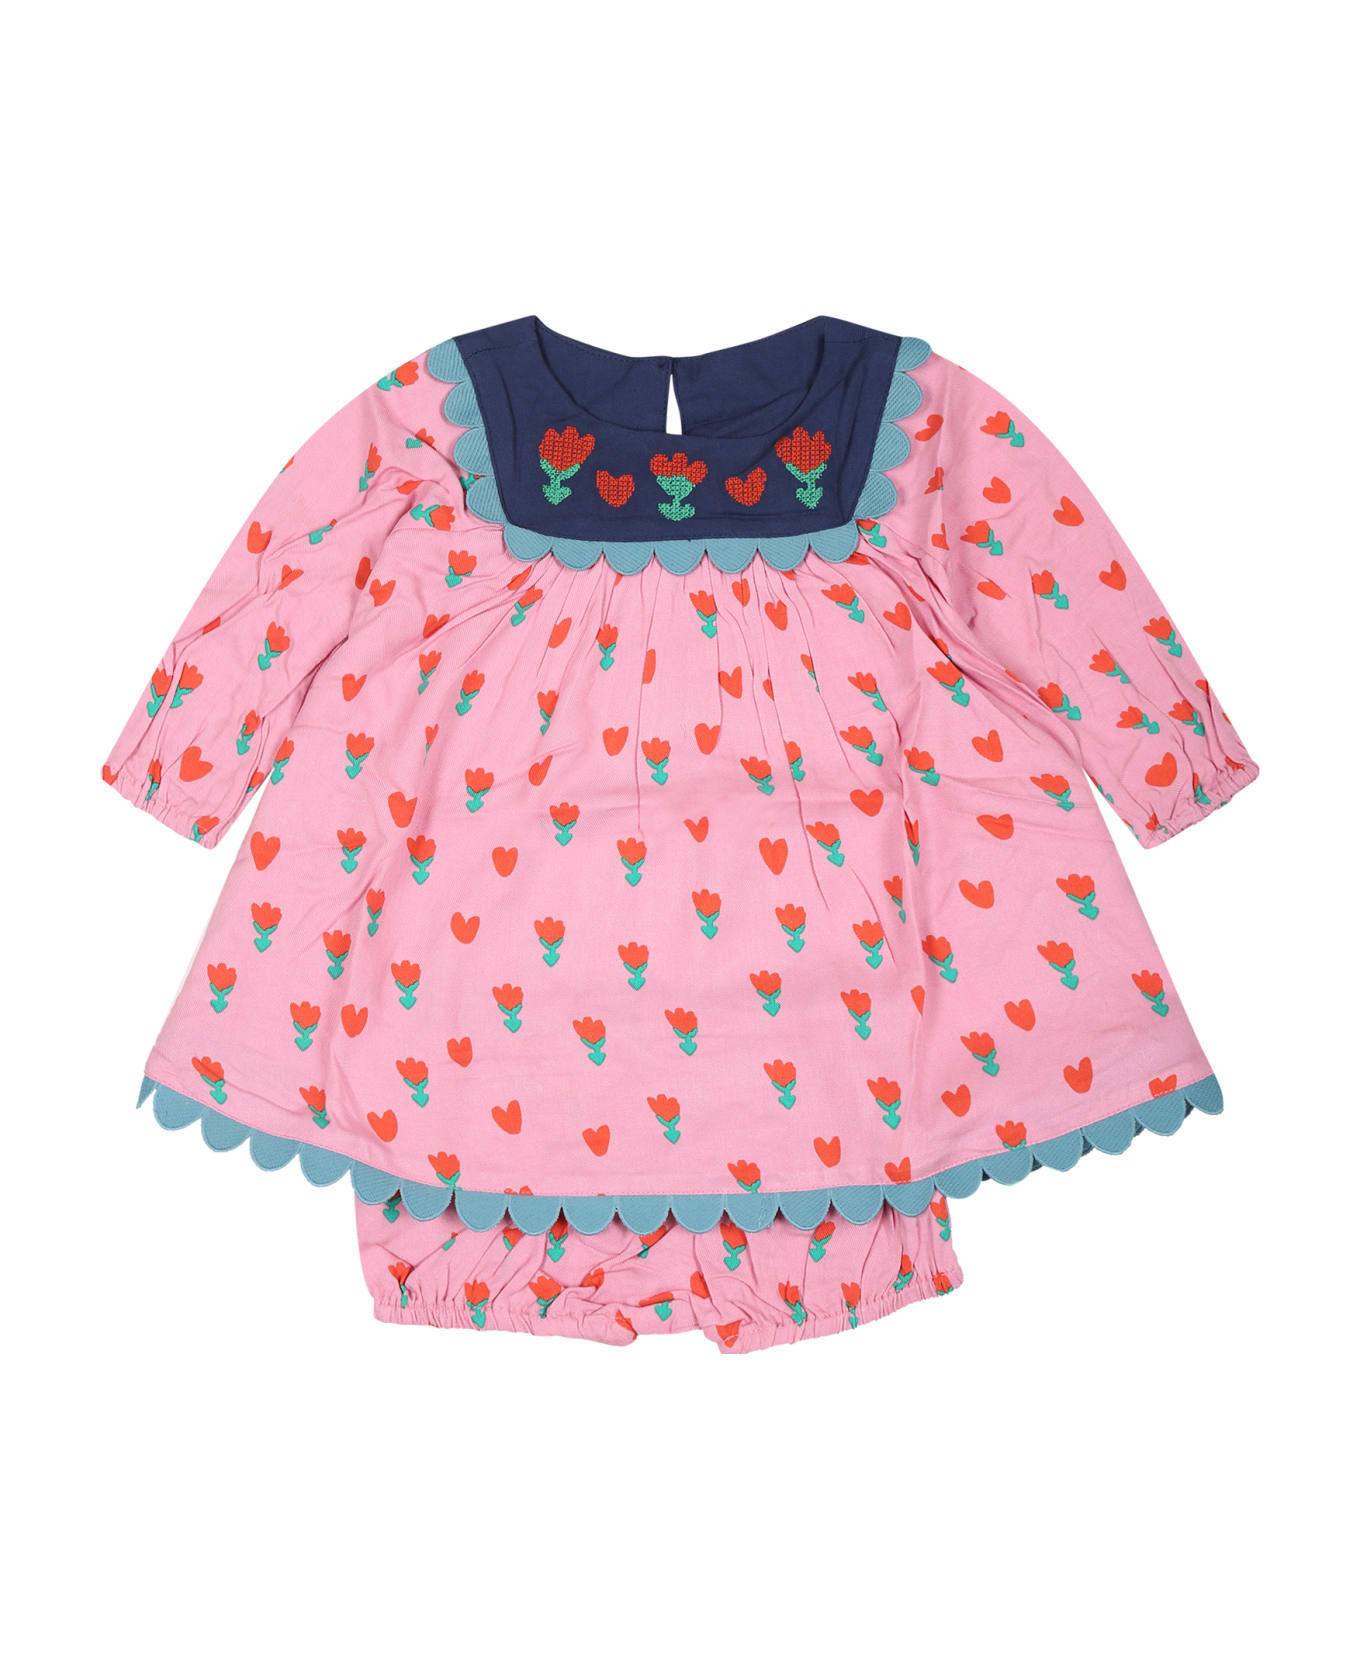 Stella McCartney Kids Pink Dress For Baby Girl With Tulip Print - Pink ウェア